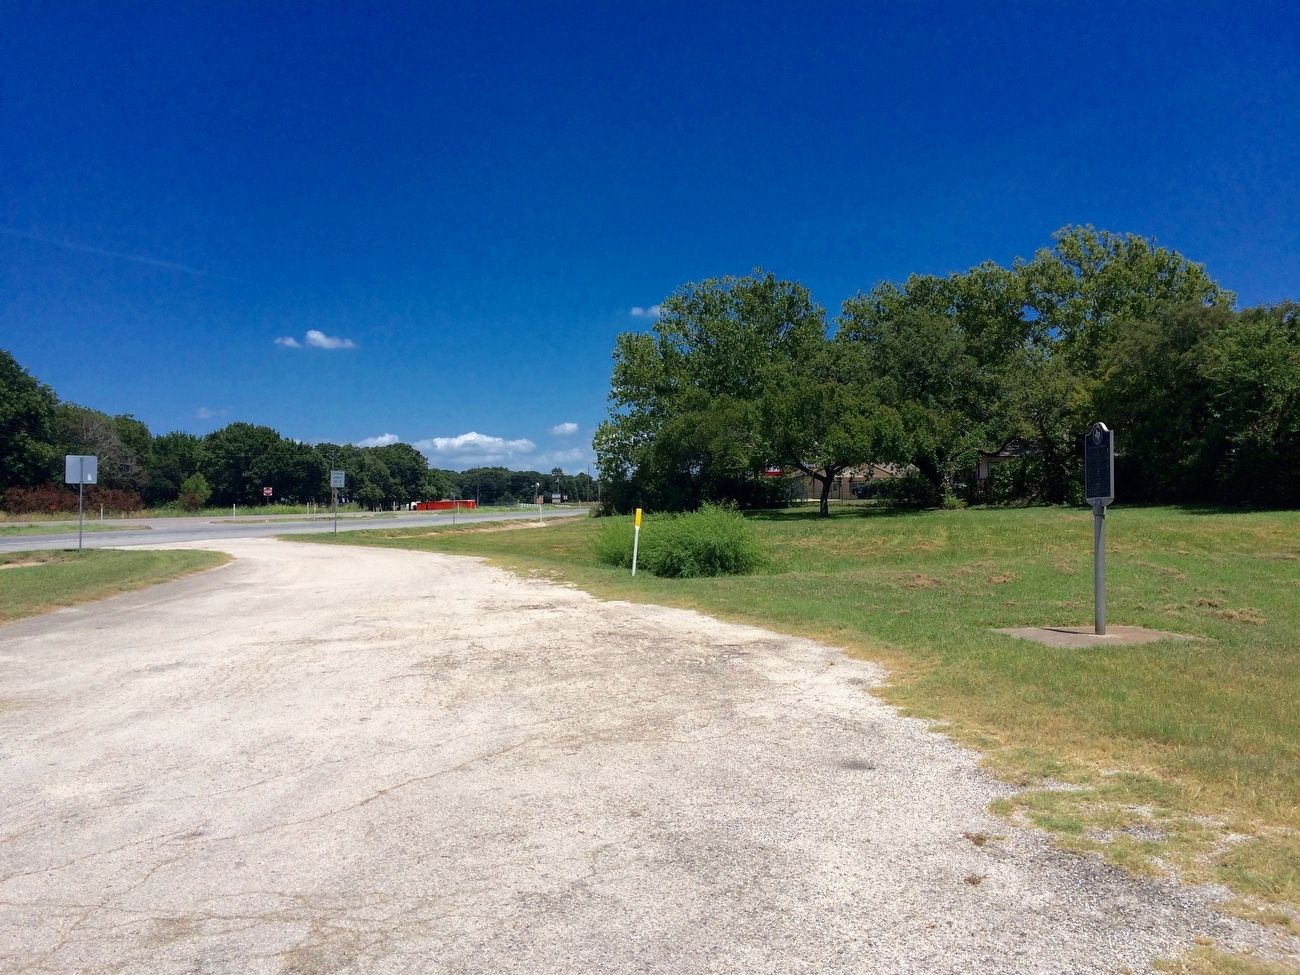 The Cross Timbers Marker looking east towards US Highway 82. image. Click for full size.